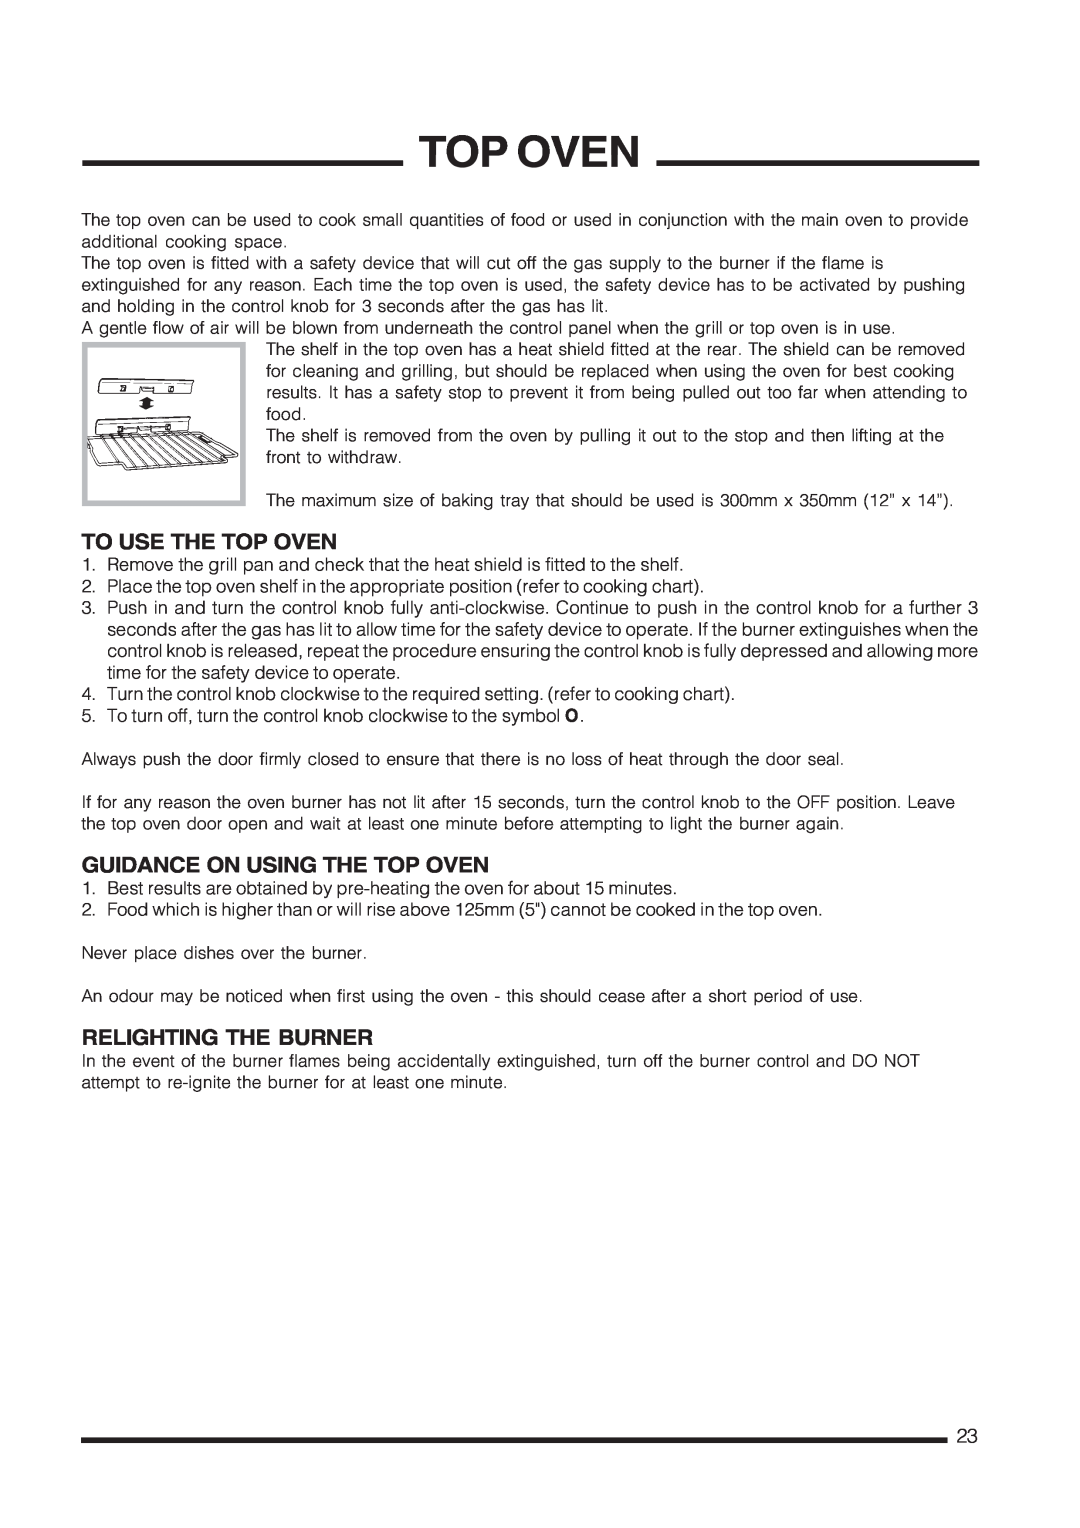 Cannon C60GCIS installation instructions To Use The Top Oven, Guidance On Using The Top Oven, Relighting The Burner 